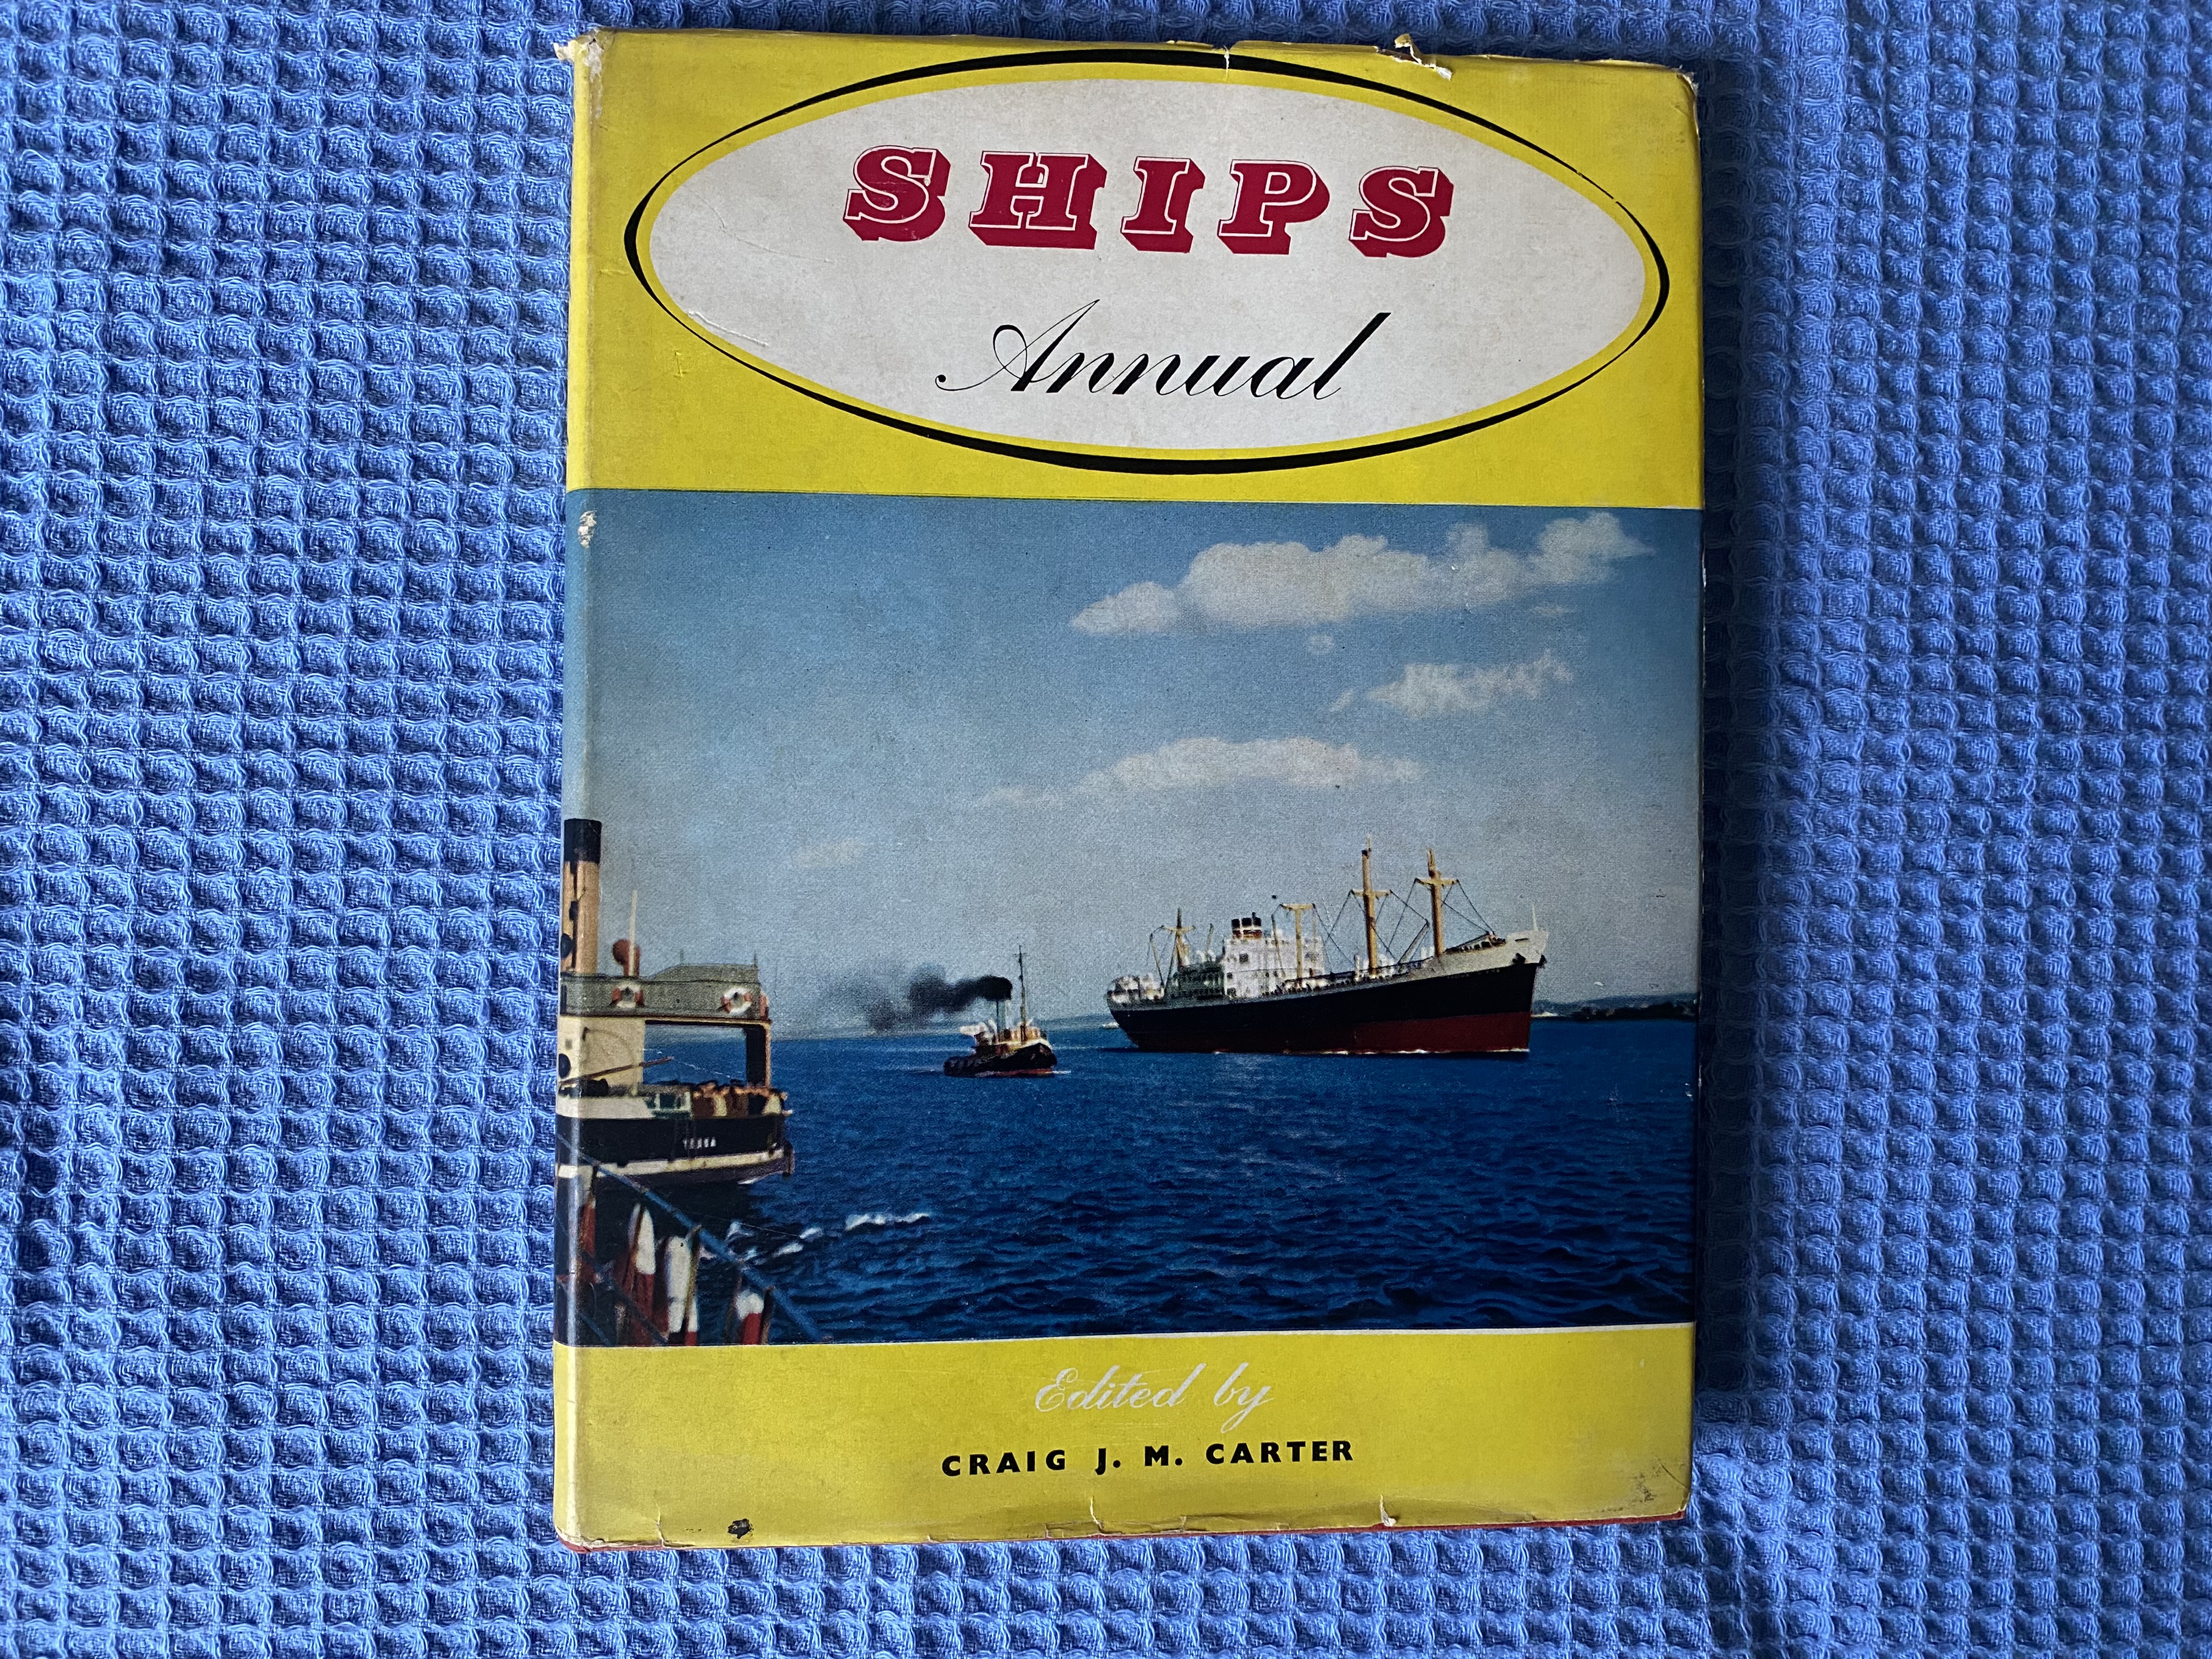 SHIPS ANNUAL BOOK FROM 1958 BY CRAIG CARTER